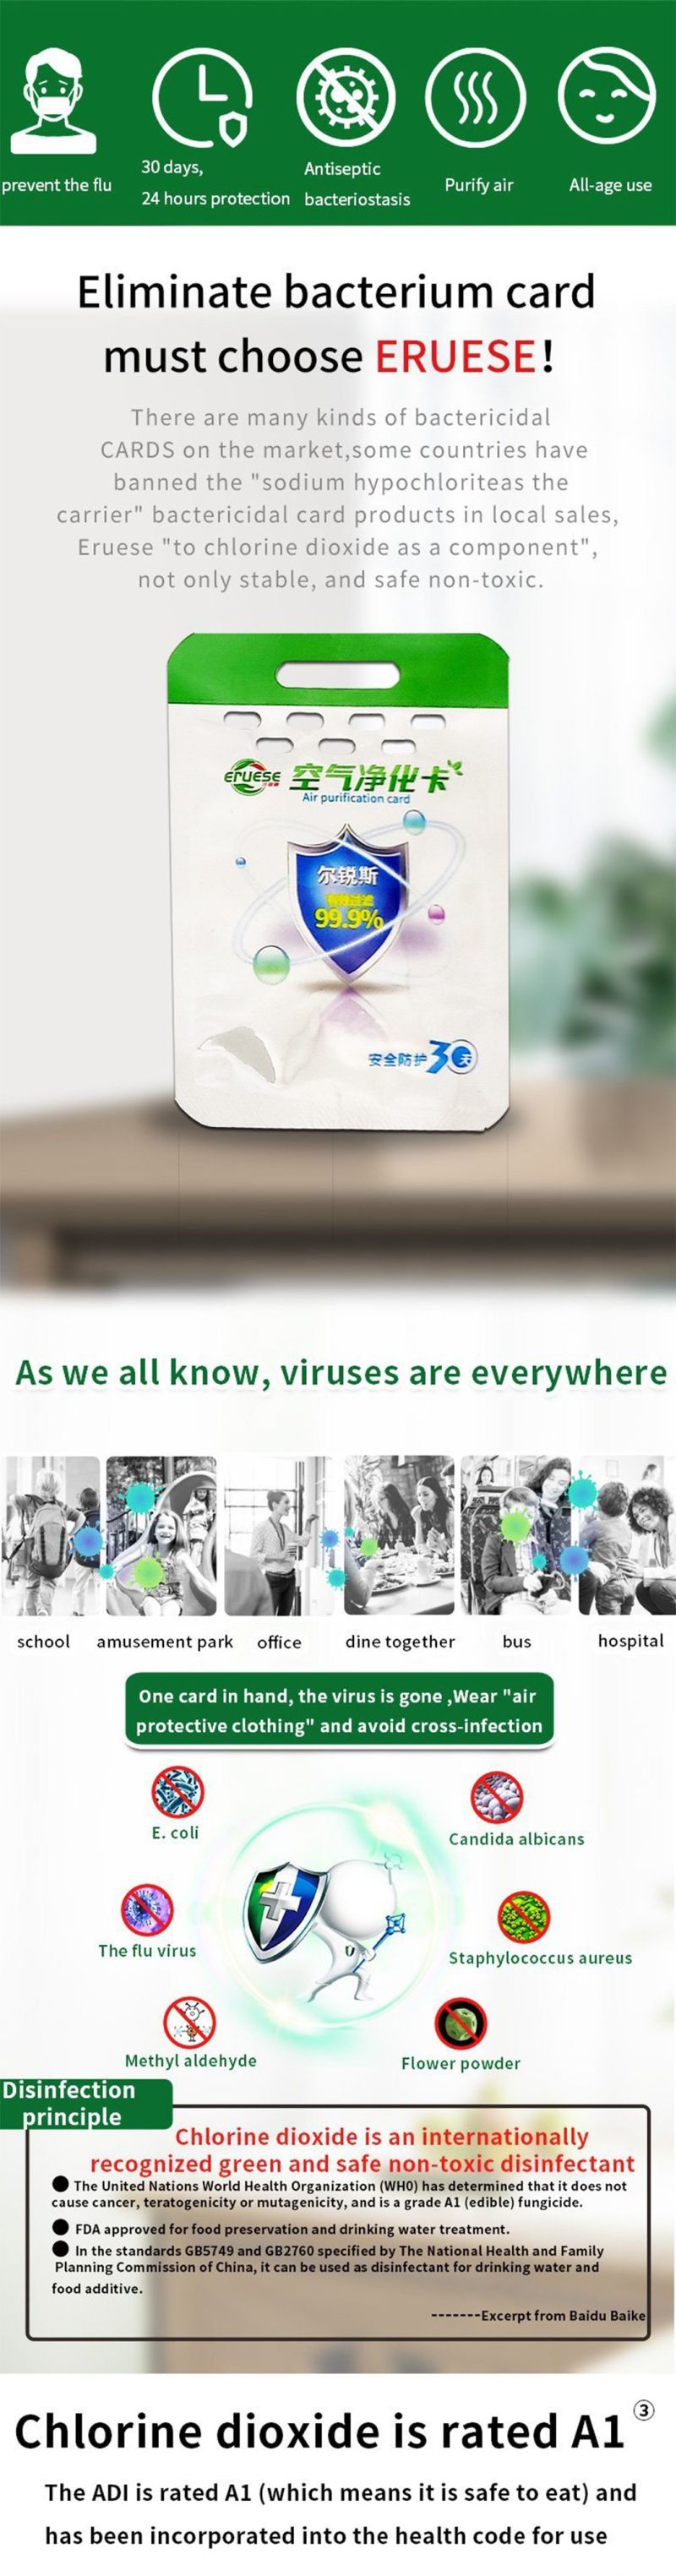 Portable Air Purification Antibacterial Disinfectant Card Protect Children and Students